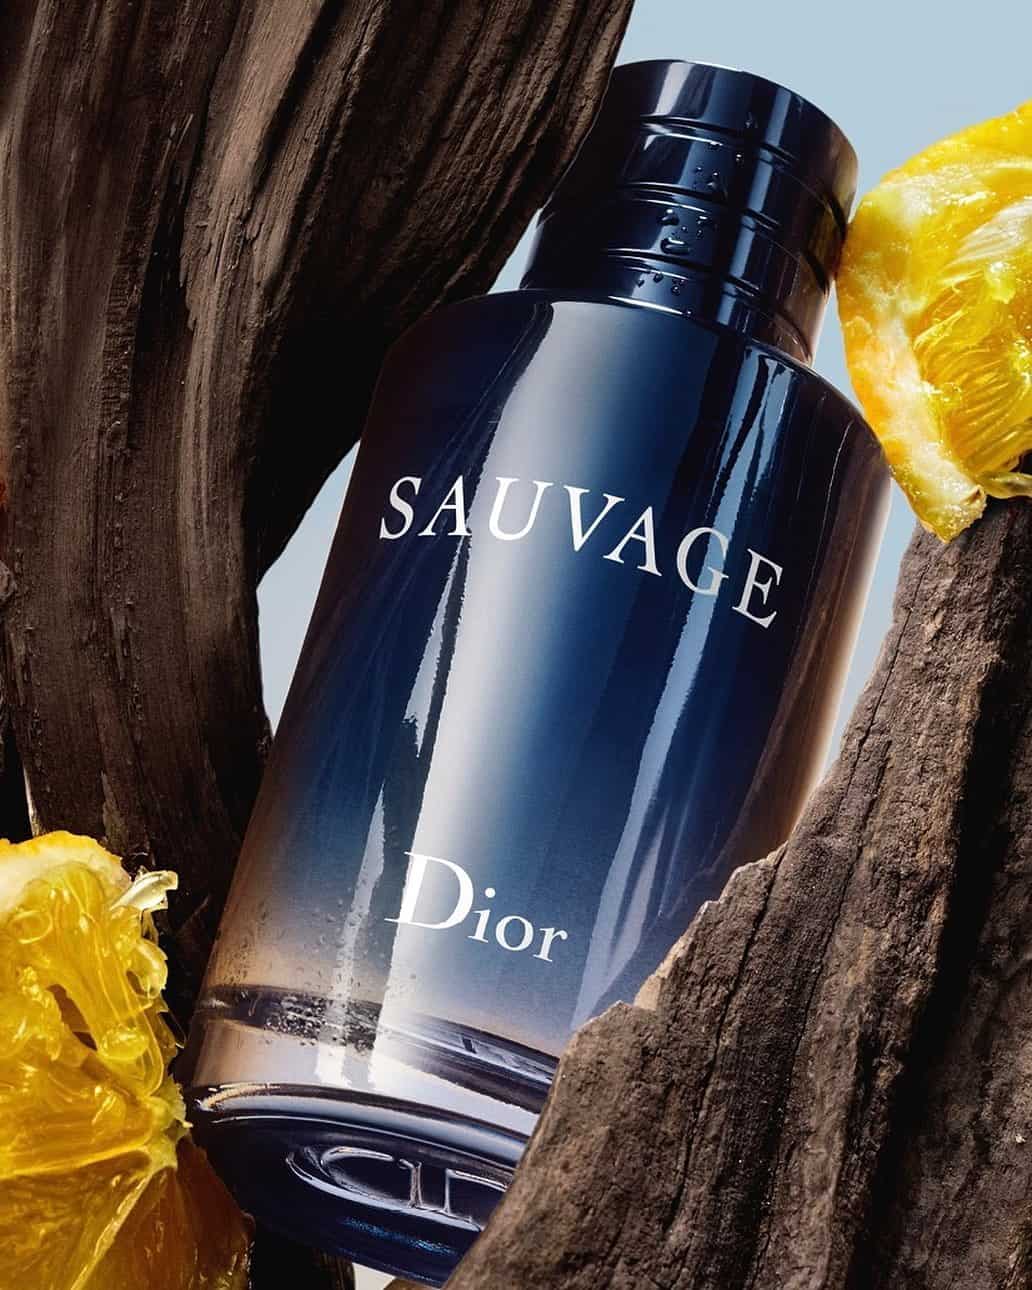 How Dior Made Sauvage the World's Number One Fragrance